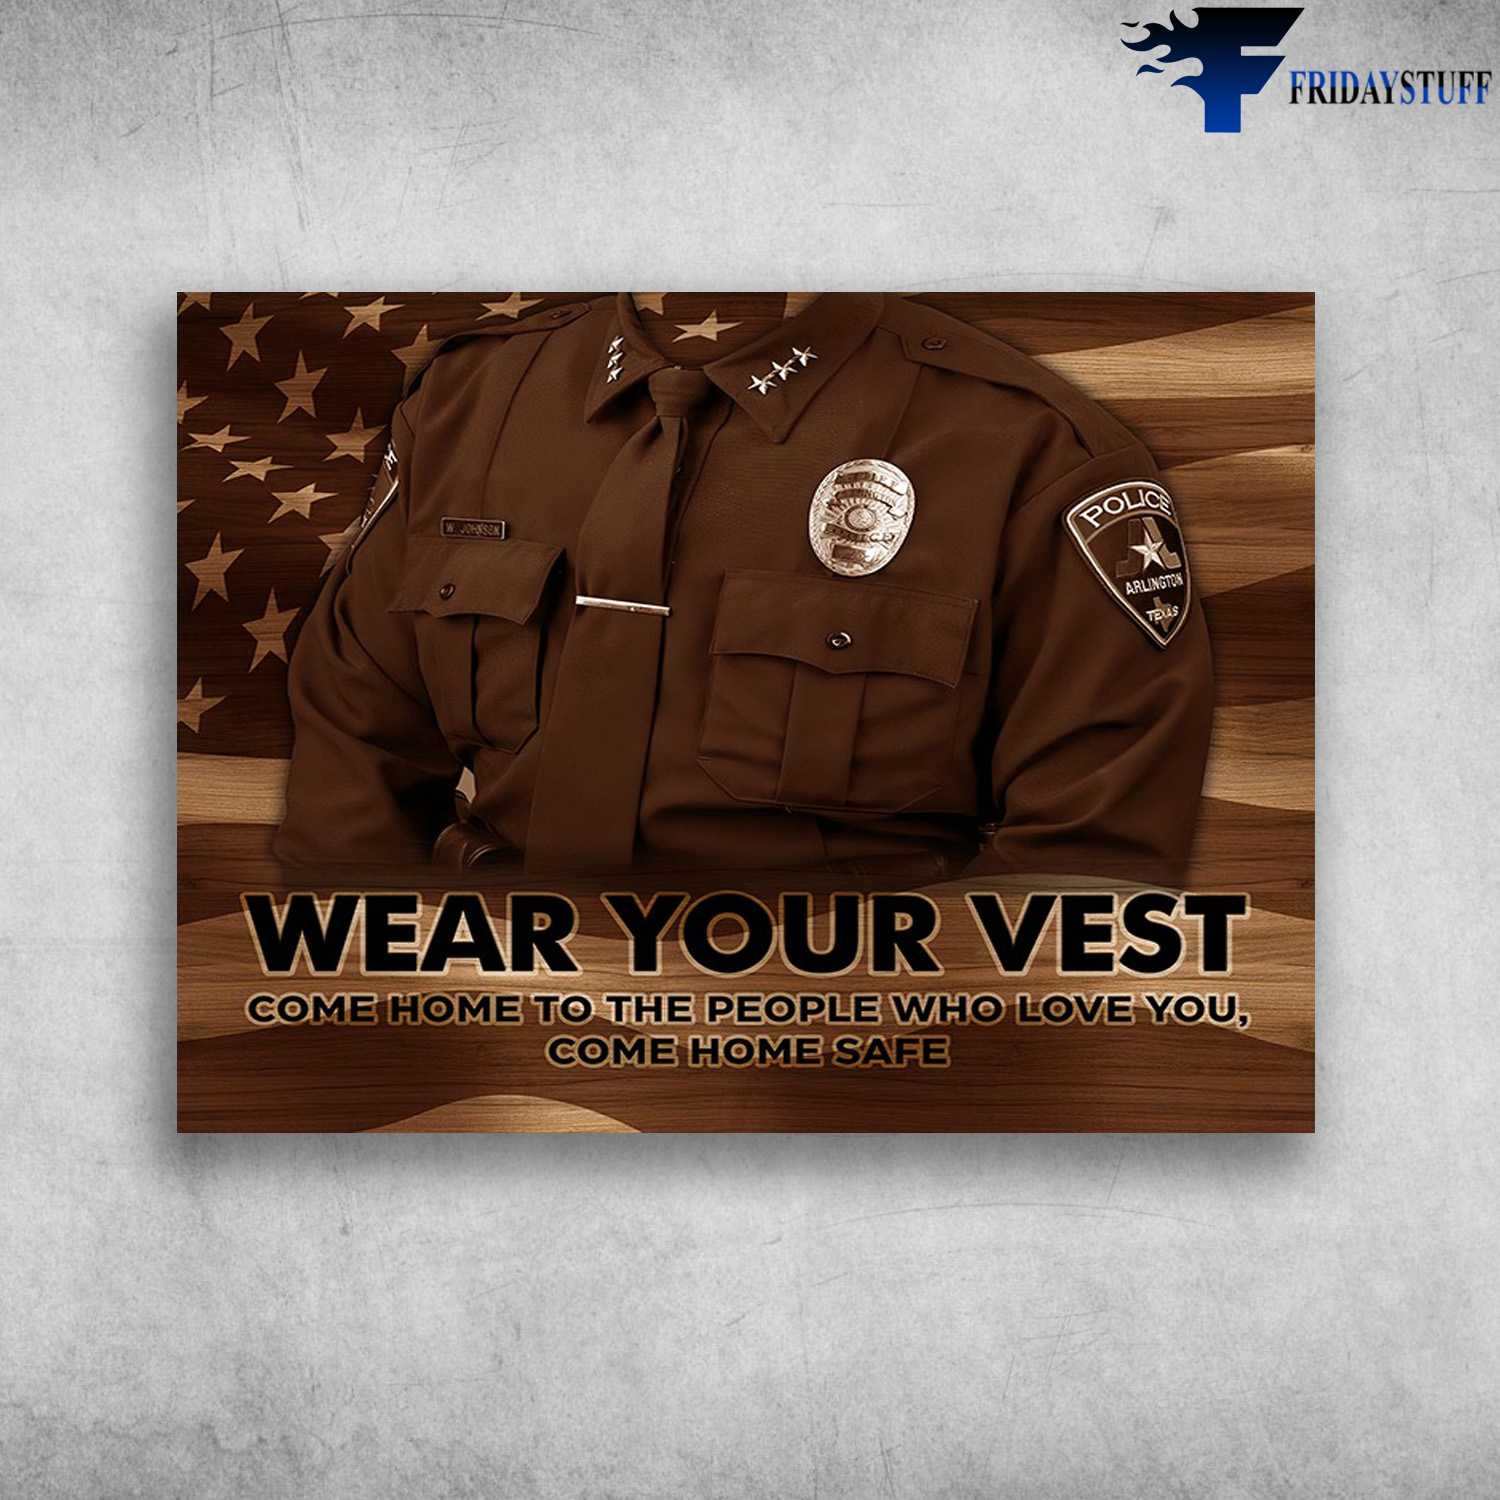 American Police - Wear Your Vest, Come Home To The People Who Love You, Come Home Safe